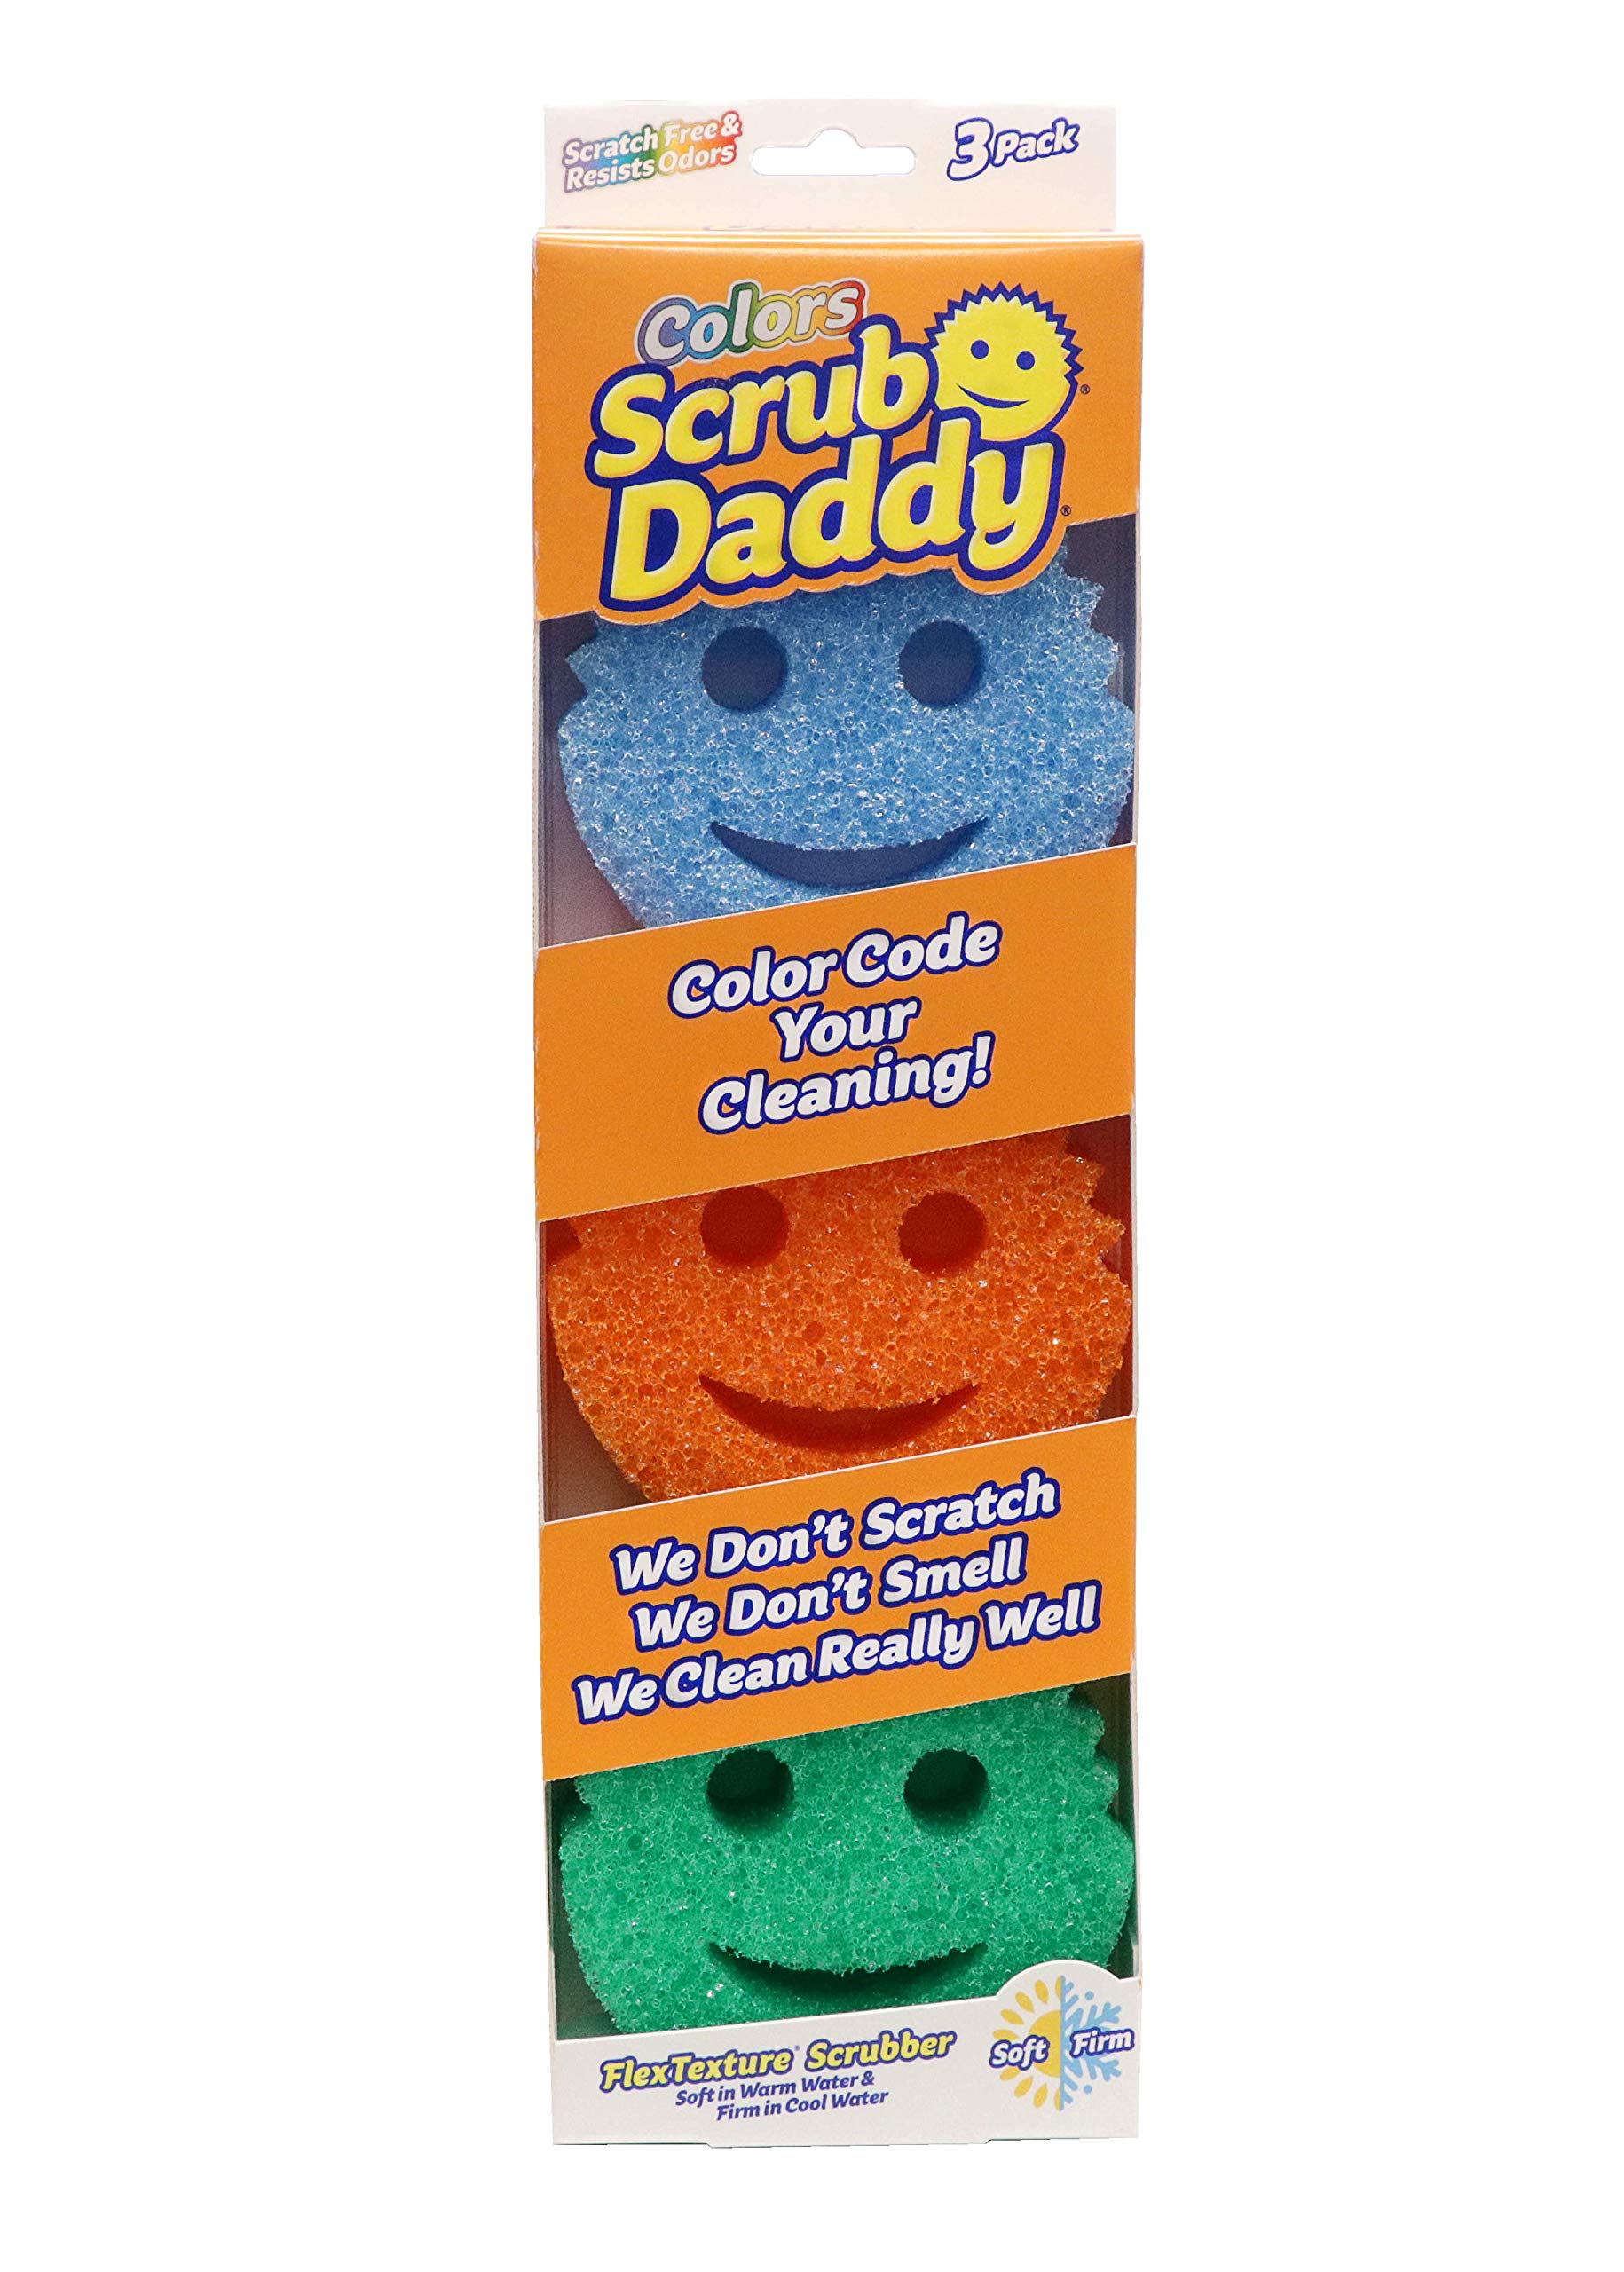 Scrub Daddy Scrub Mommy Variety Pack - Scratch-Free Multipurpose Dish  Sponge - BPA Free & Made with Polymer Foam - Stain & Odor Resistant Kitchen